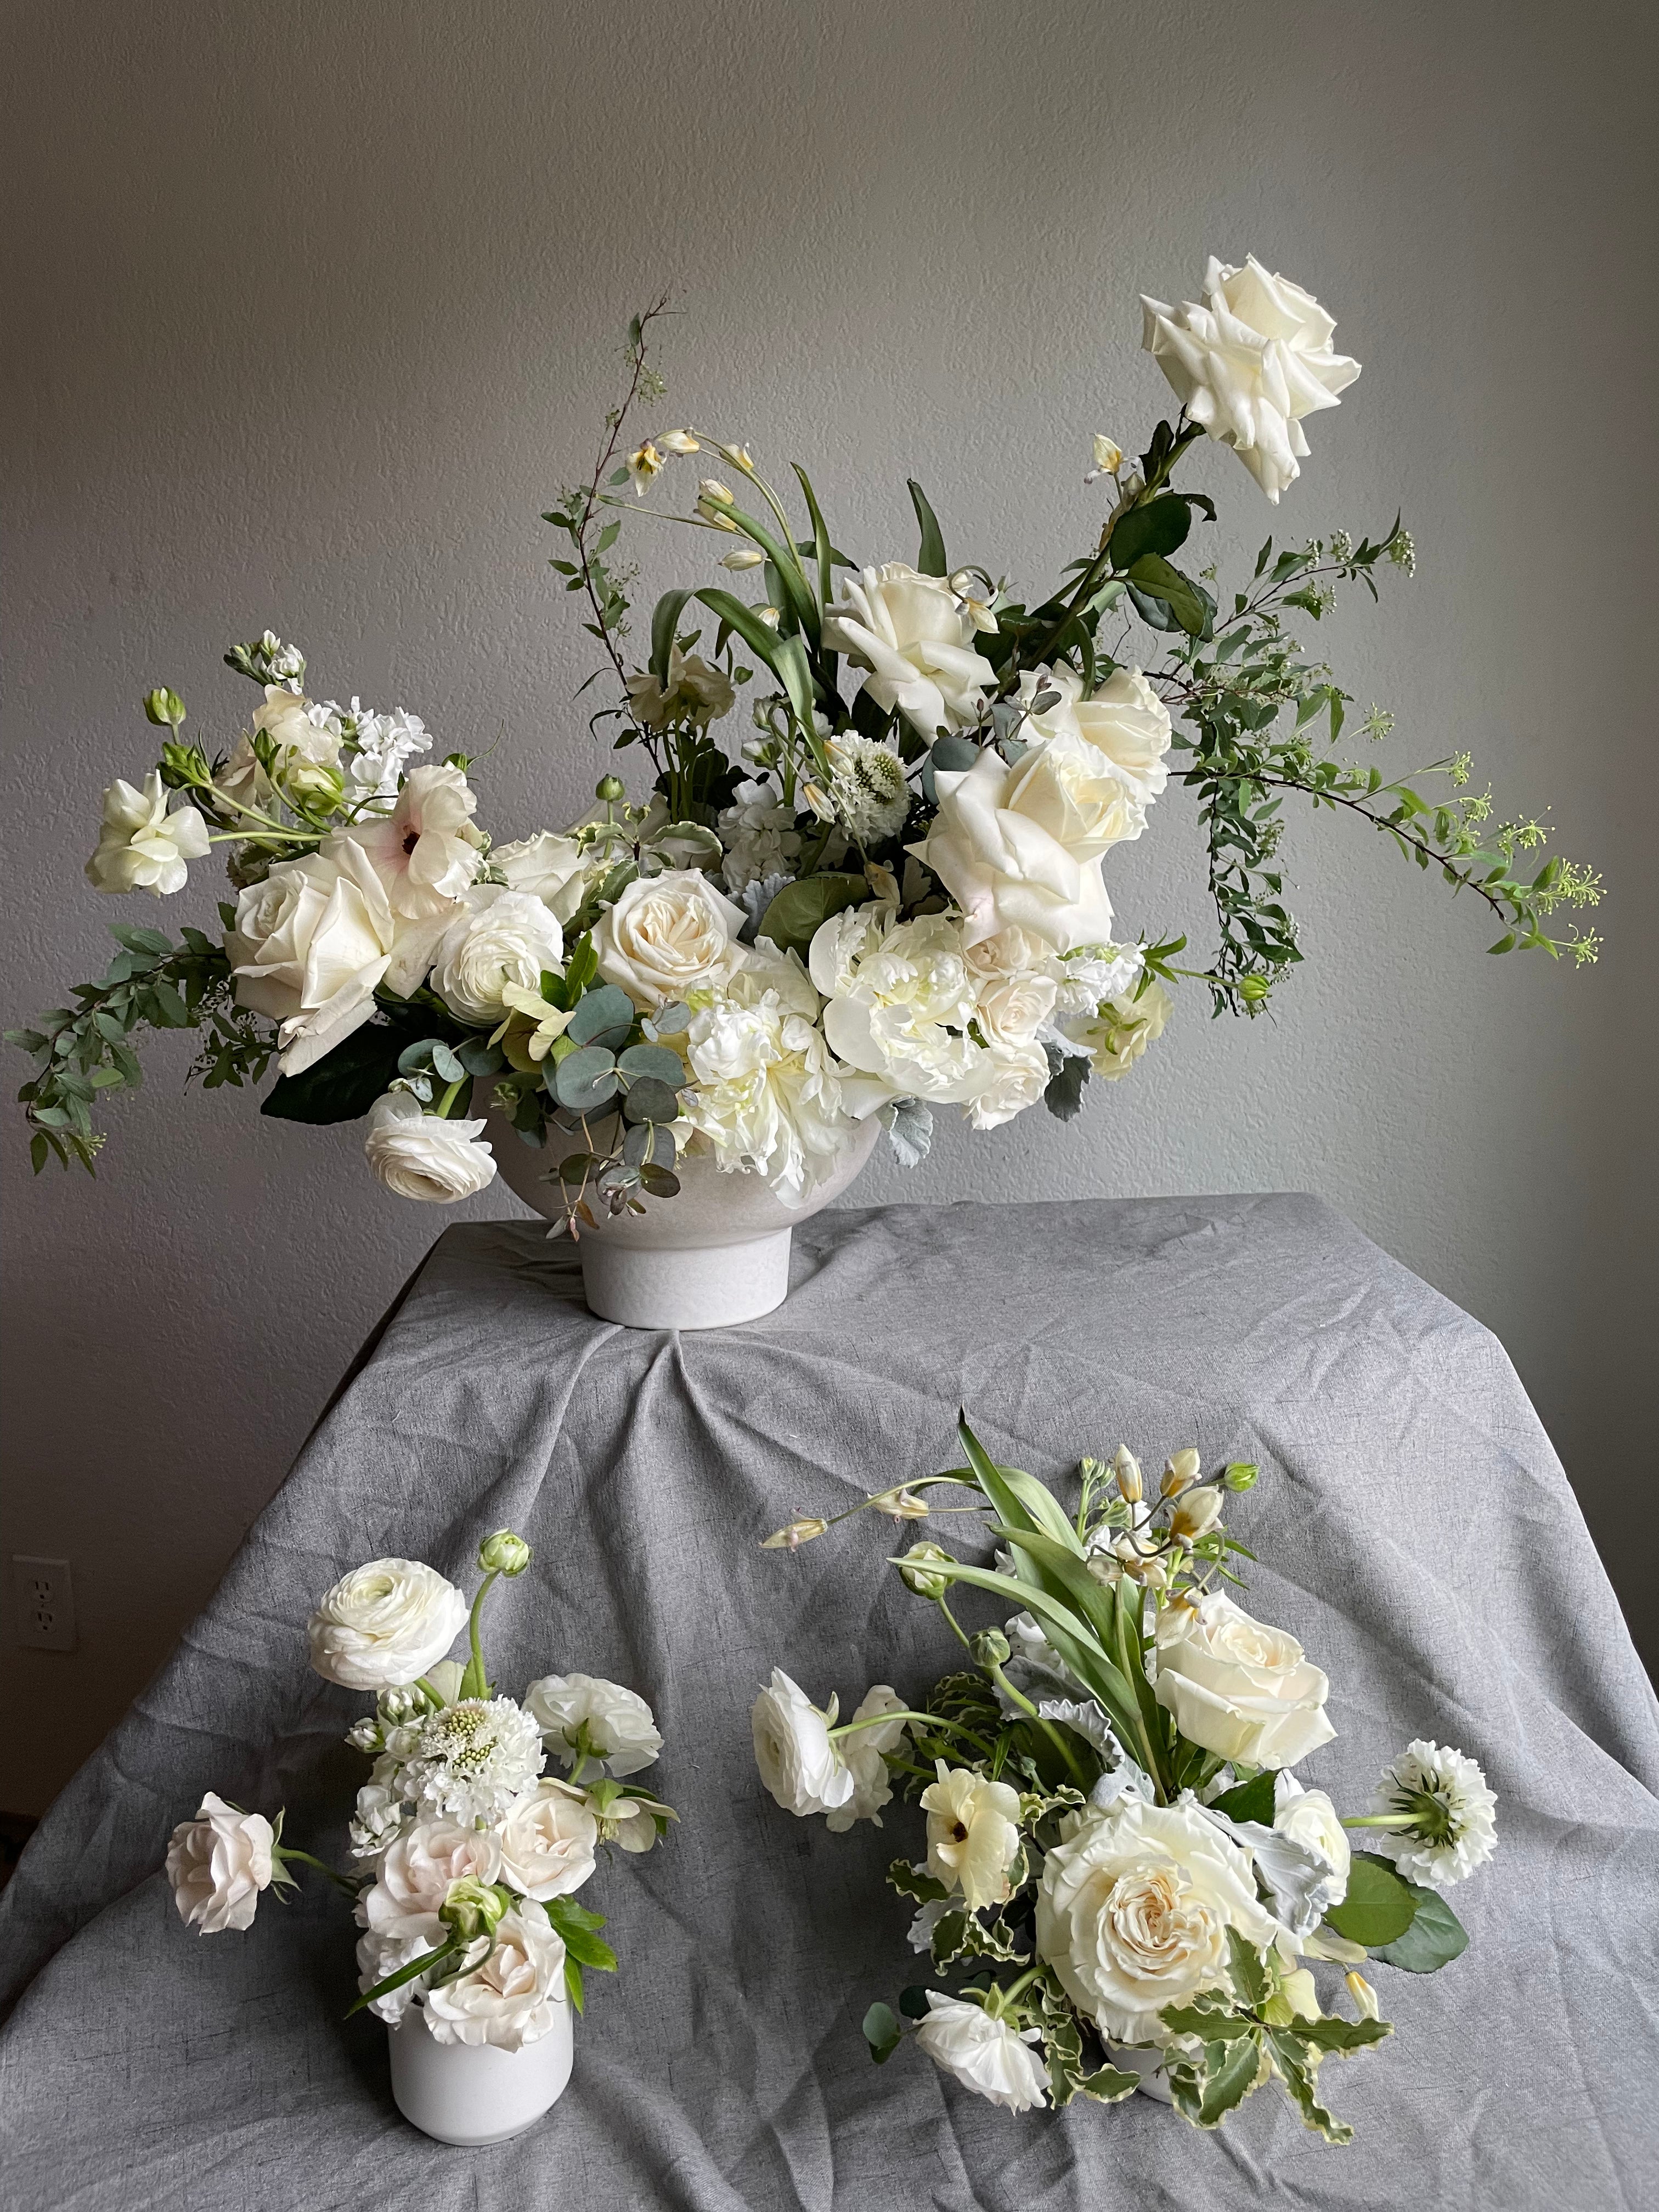 classic white and green wedding flowers